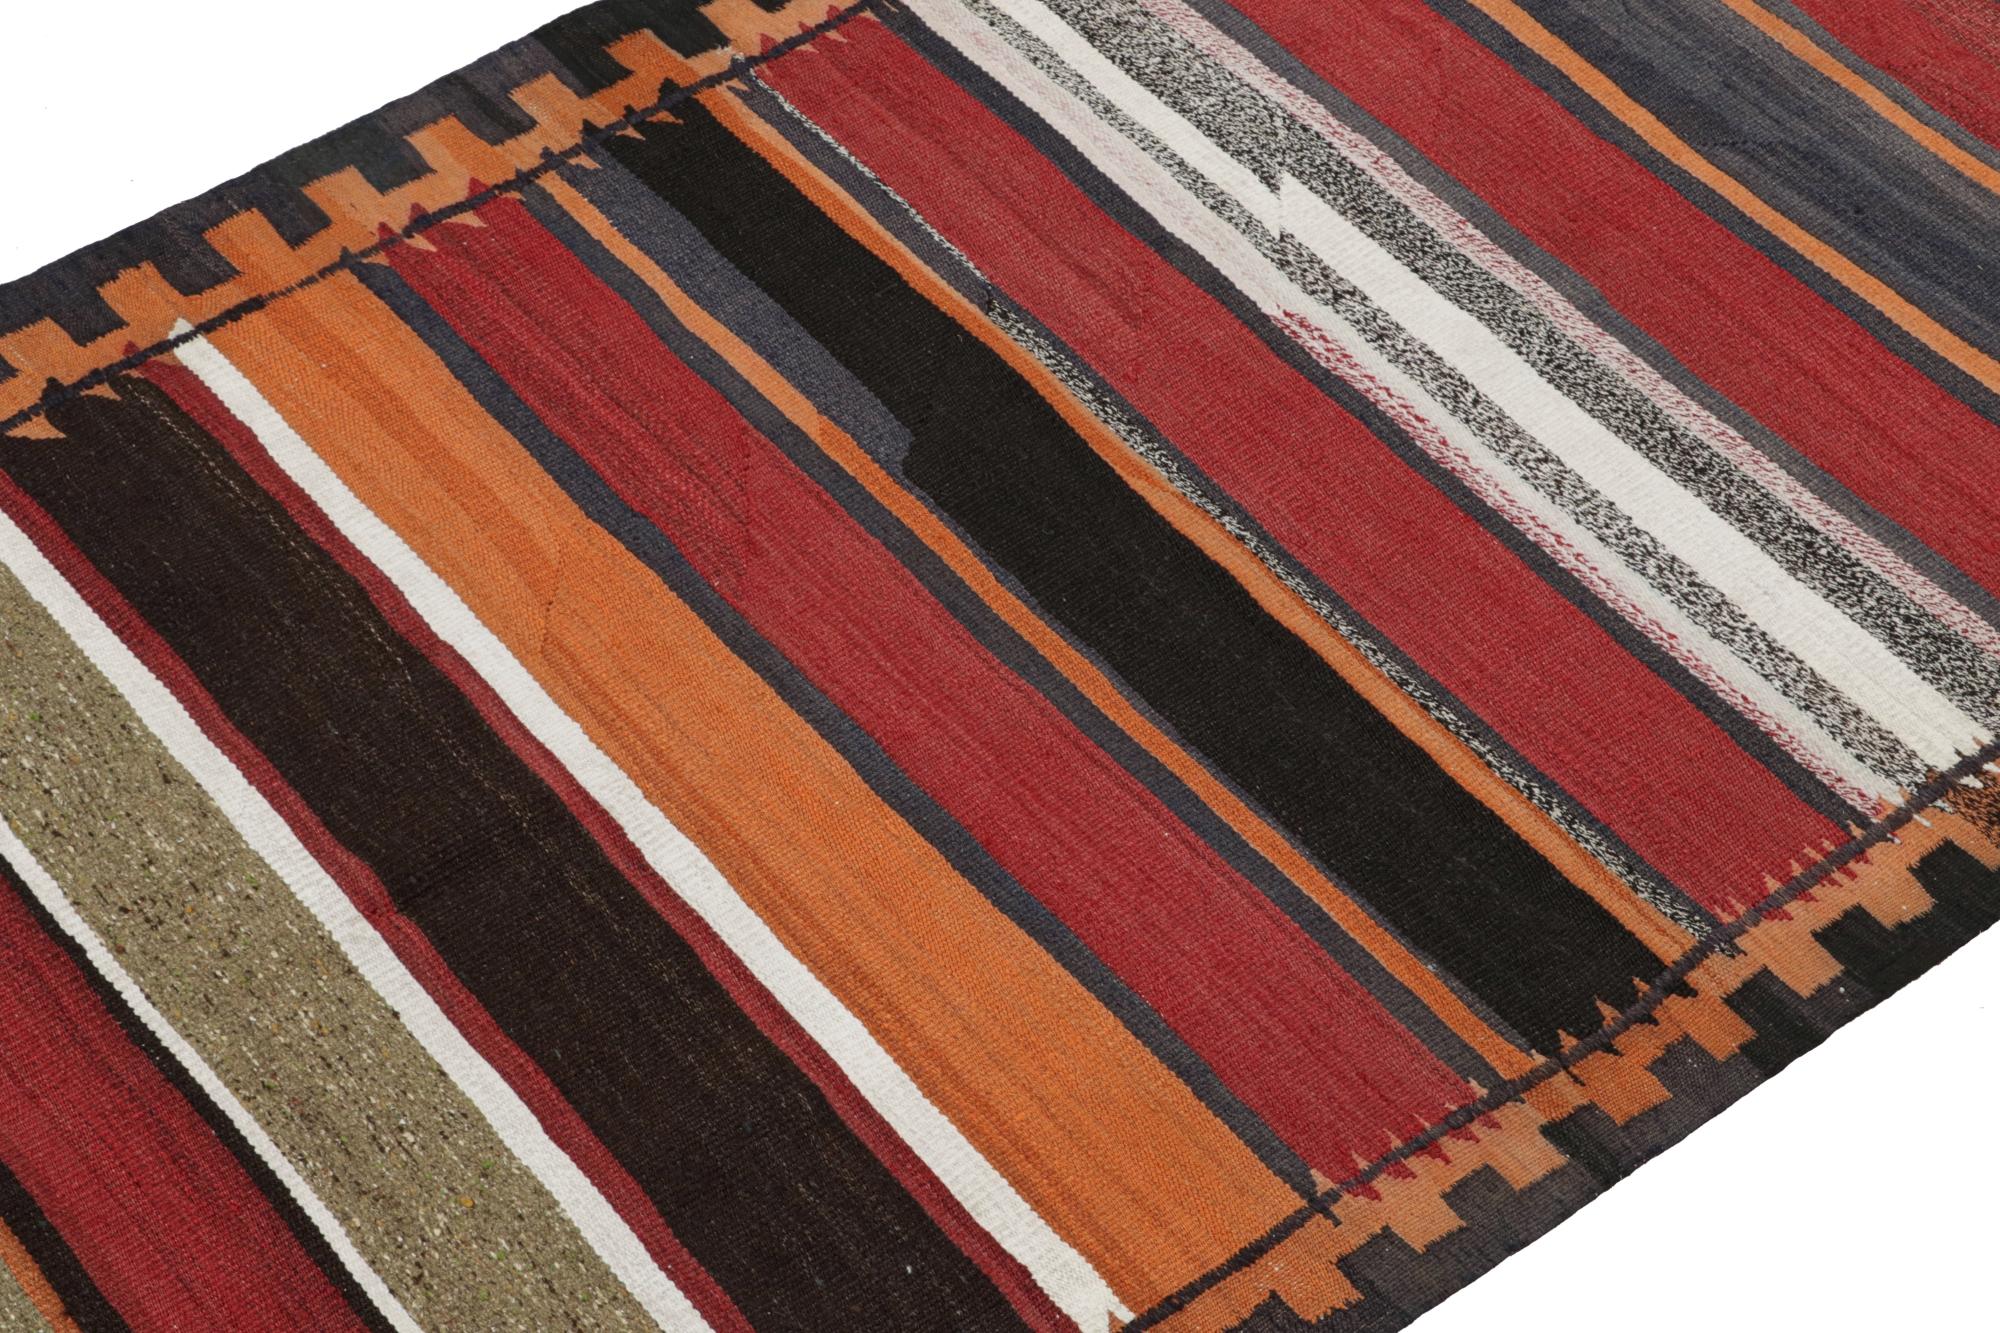 This vintage 4x9 Persian kilim is believed to be a mid-century Shahsavan tribal rug—handwoven in wool circa 1950-1960.

On the Design:

This particular Shahsavan rug enjoys stripes in many deep, warm and rich tones in its polychromatic